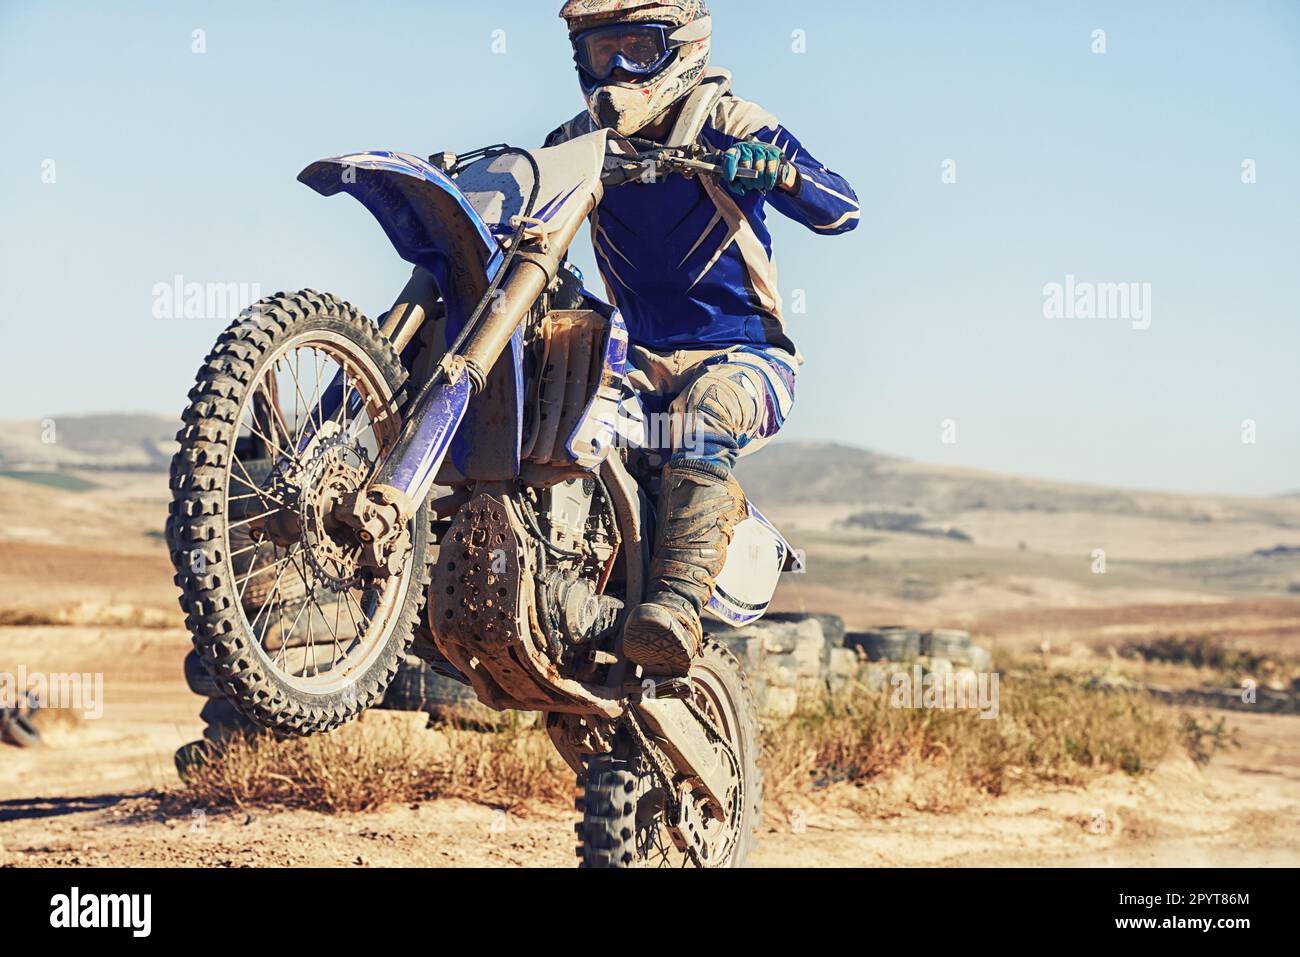 Hes in full control. a motocross driver performing a wheelie during a race. Stock Photo